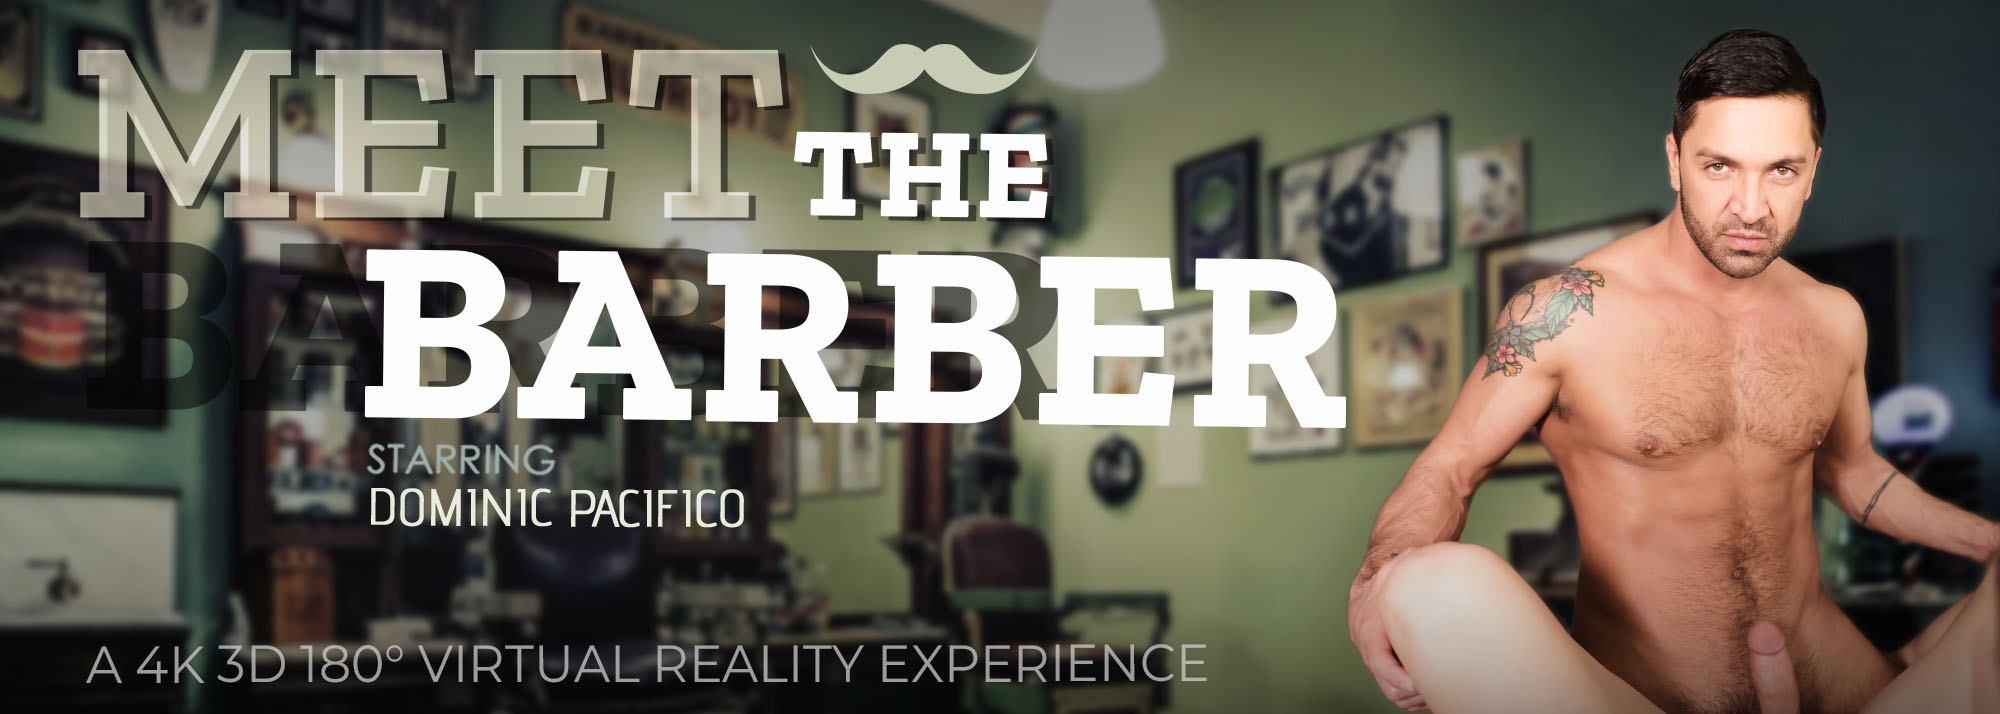 Meet the Barber - VR Porn Video, Starring: Dominic Pacifico VR